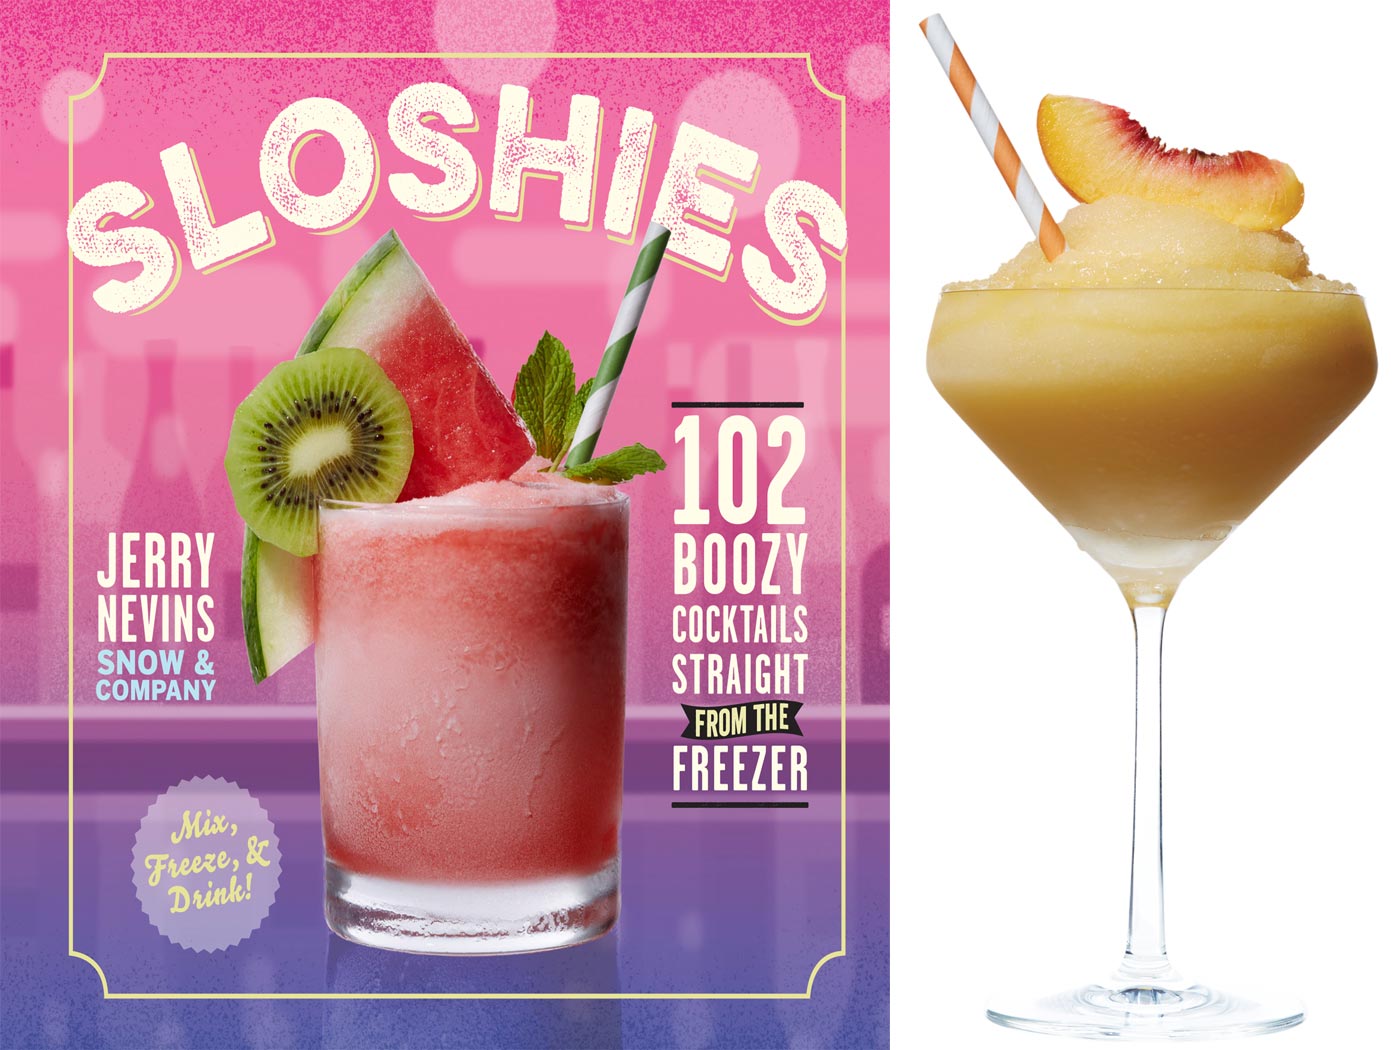 Sloshies: 102 Boozy Cocktails Straight from the Freezer by Jerry Nevins Workman press